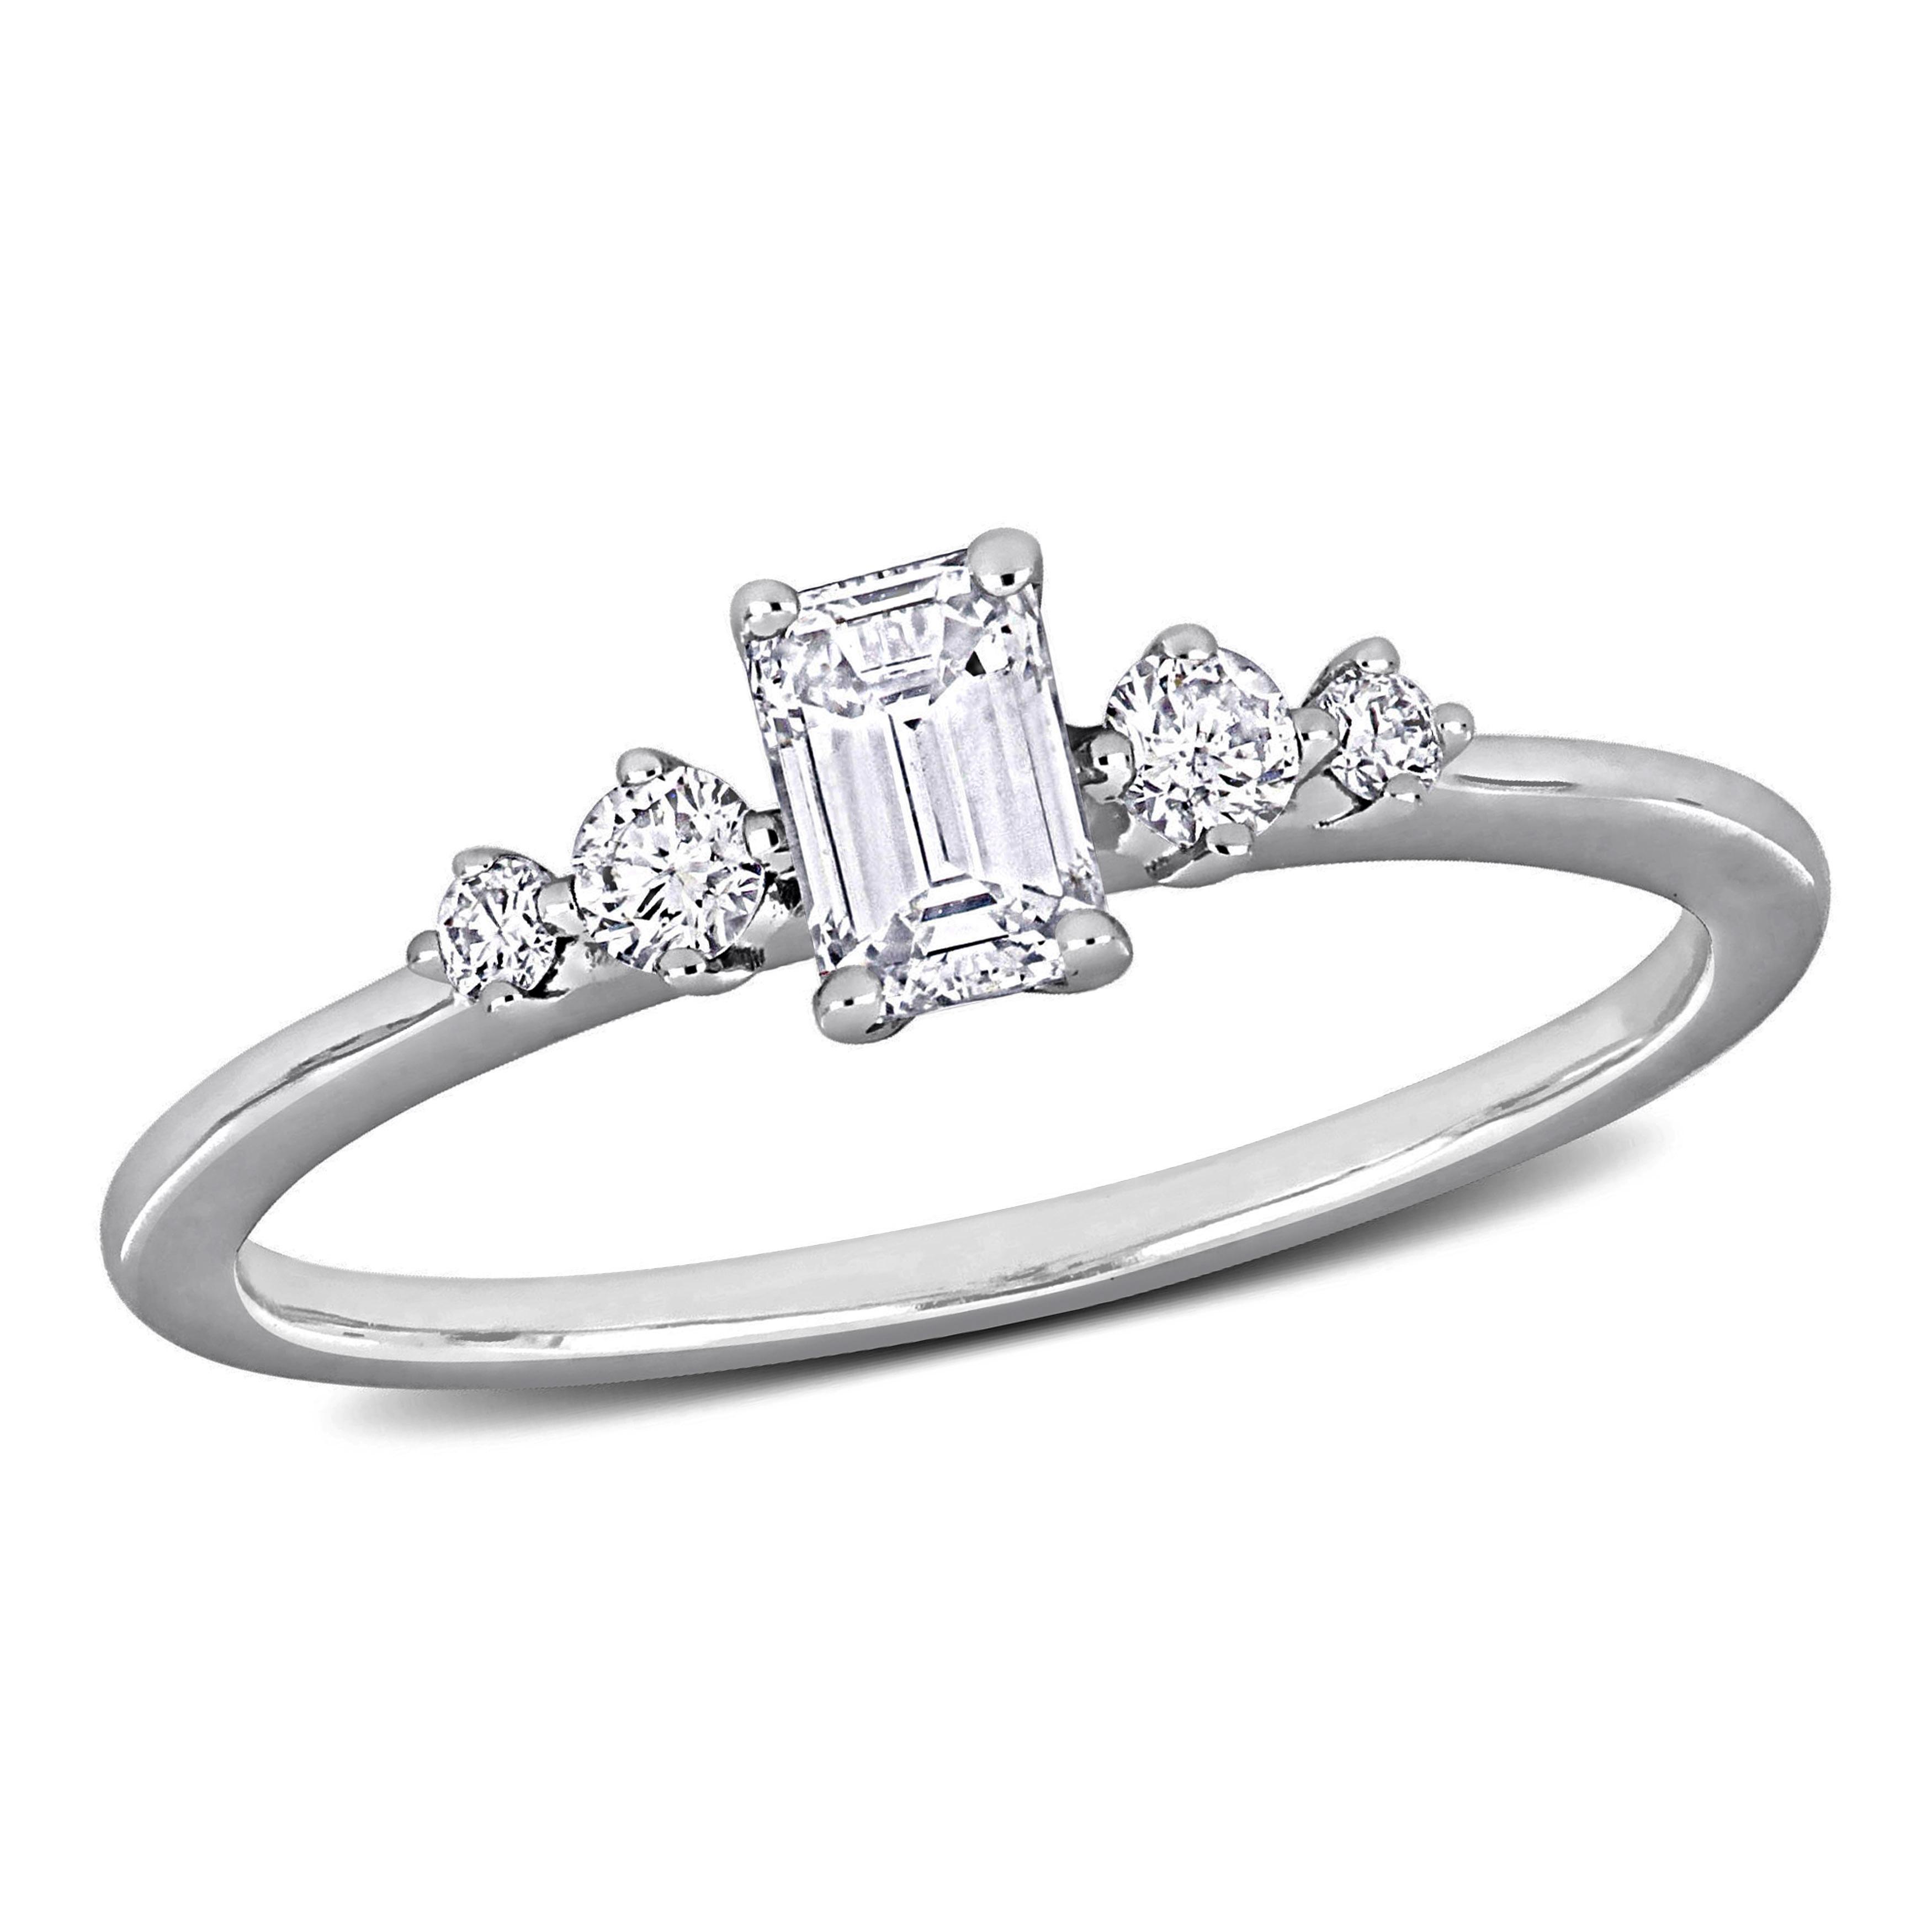 1/2 CT TW Emerald Cut and Round Diamond Engagement Ring in 14k White Gold